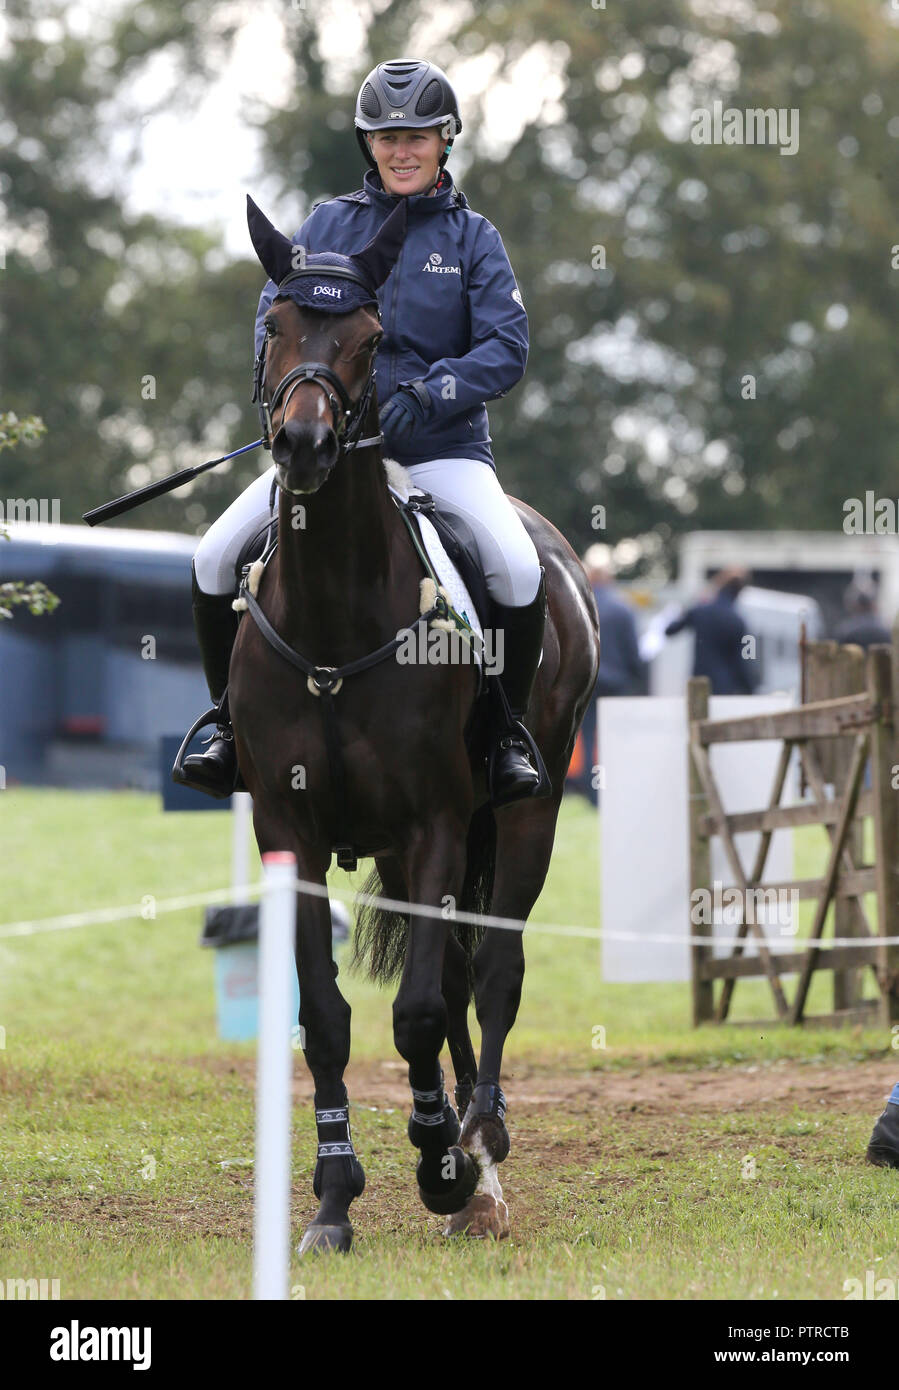 Royals attend day 3 of the Gatcombe Horse Trials at Whatley Manor  Featuring: Mia Tindall, Isla Phillips Where: Stroud, United Kingdom When:  09 Sep 2018 Credit: WENN Stock Photo - Alamy